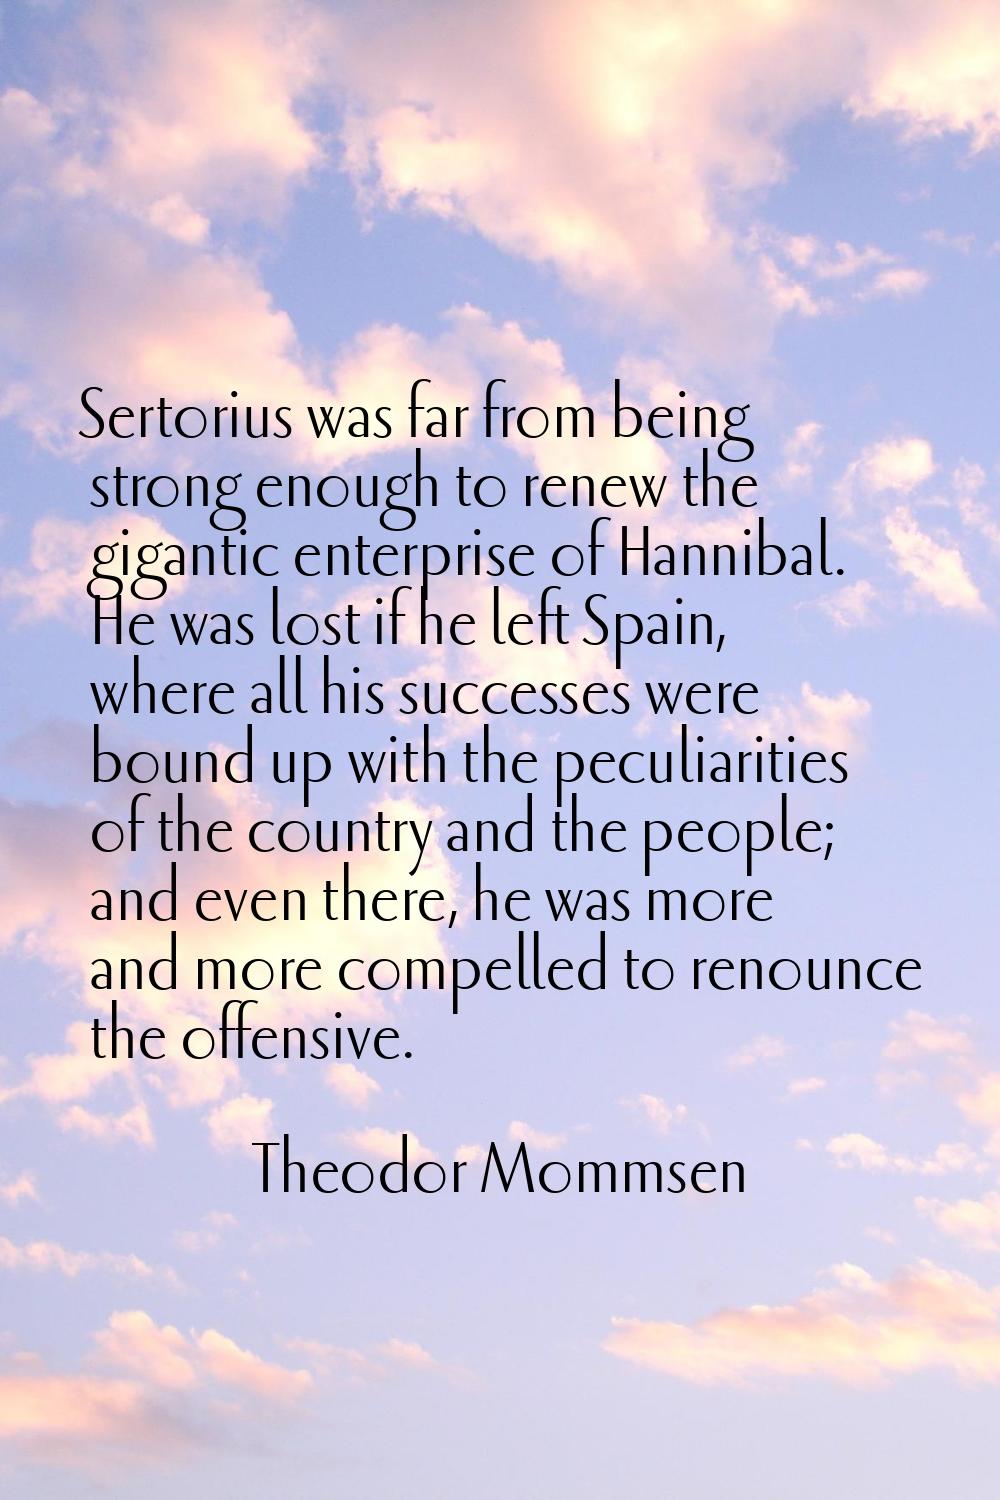 Sertorius was far from being strong enough to renew the gigantic enterprise of Hannibal. He was los